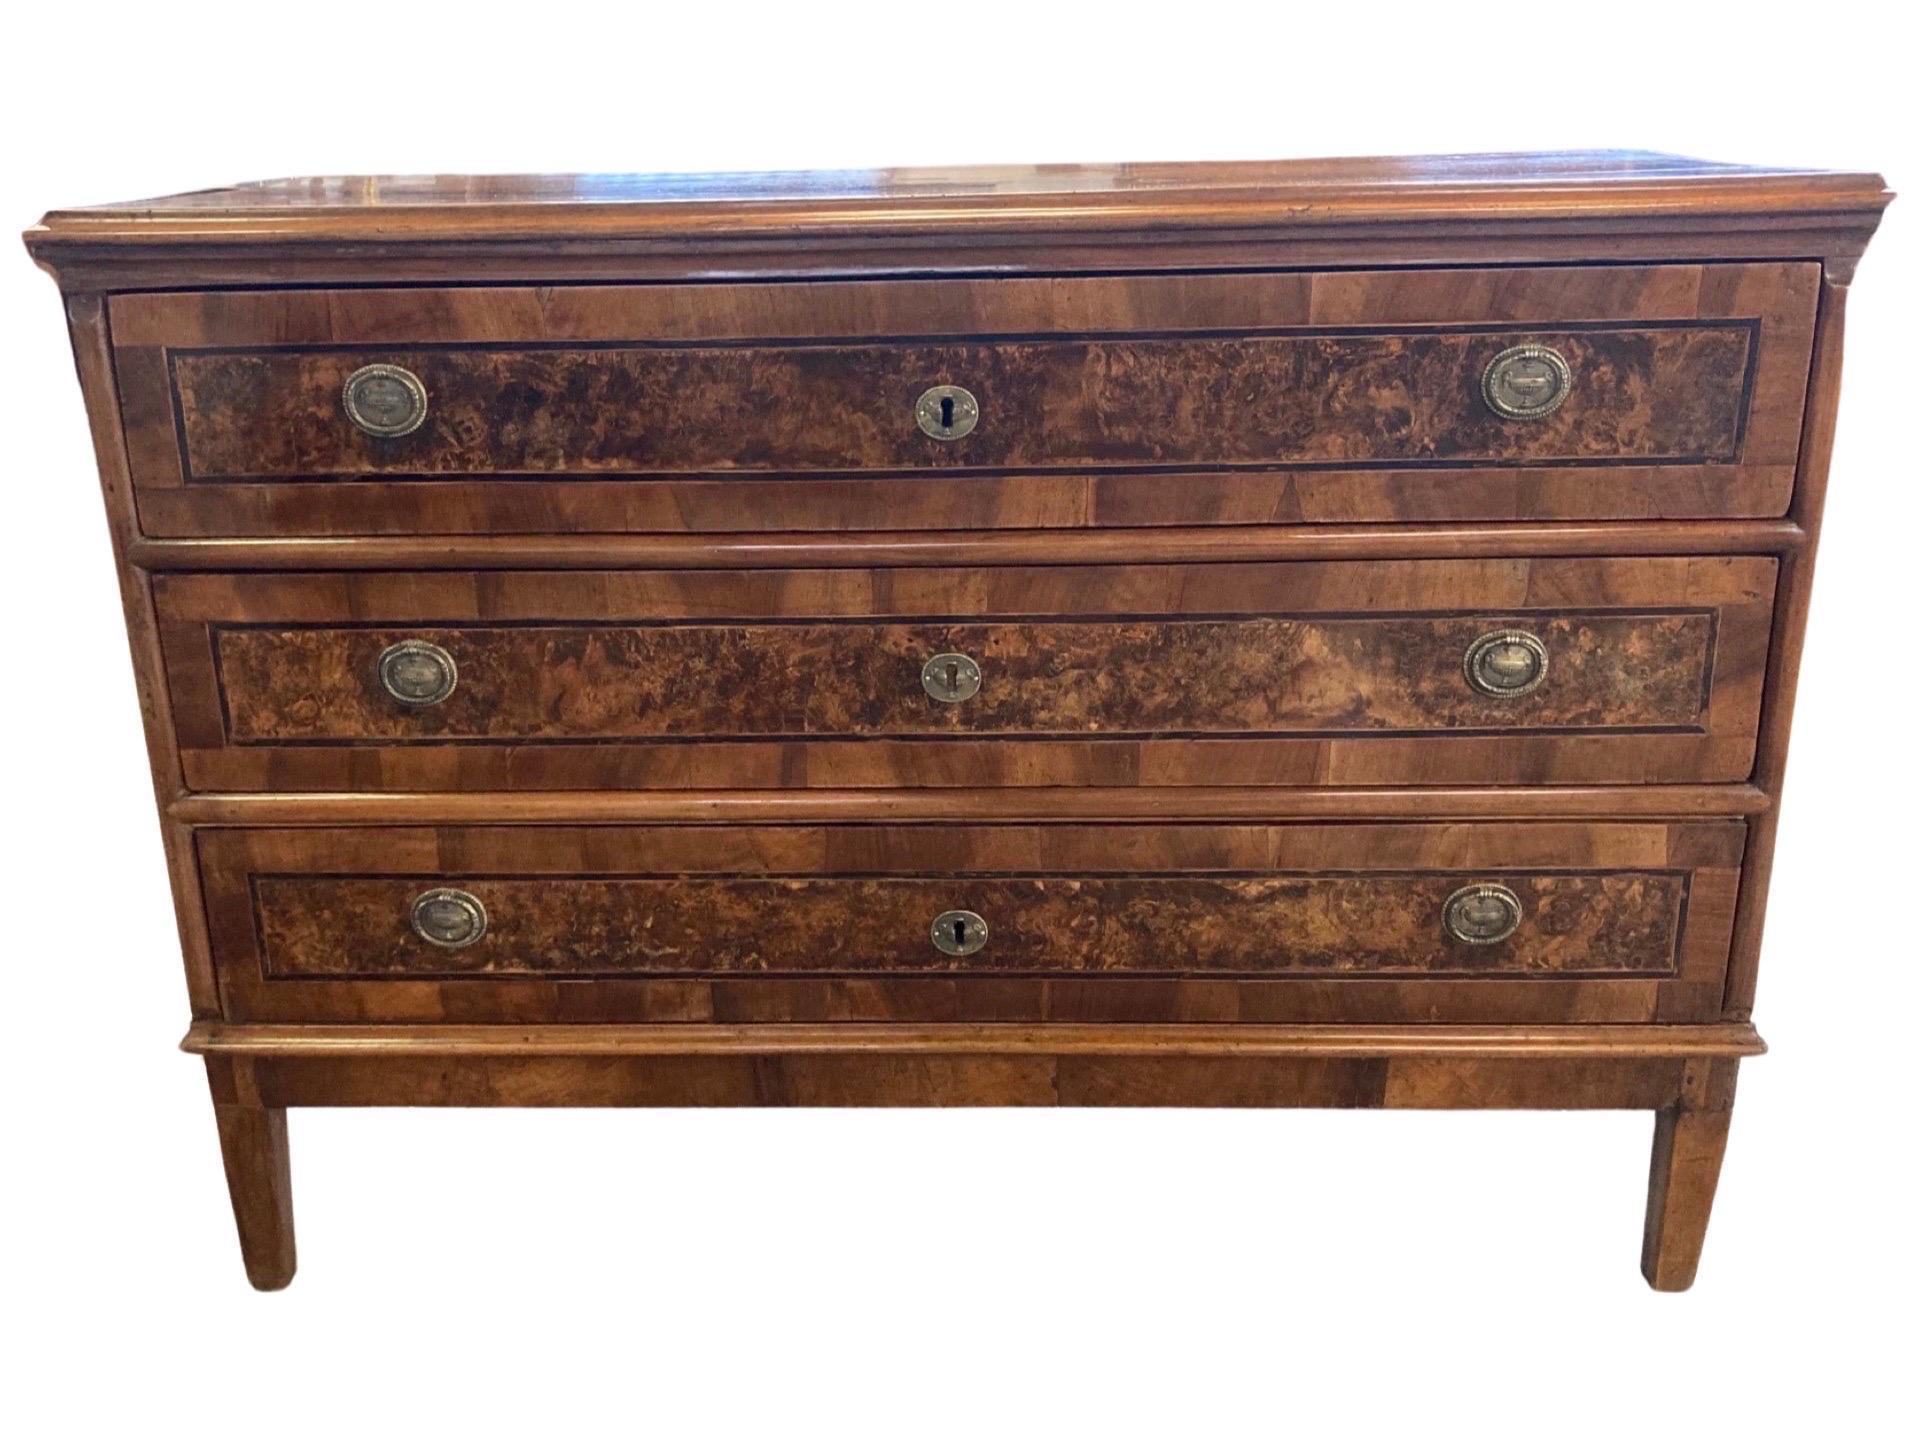 Hand-Carved 18th Century Italian Neoclassical Walnut Banded Commode